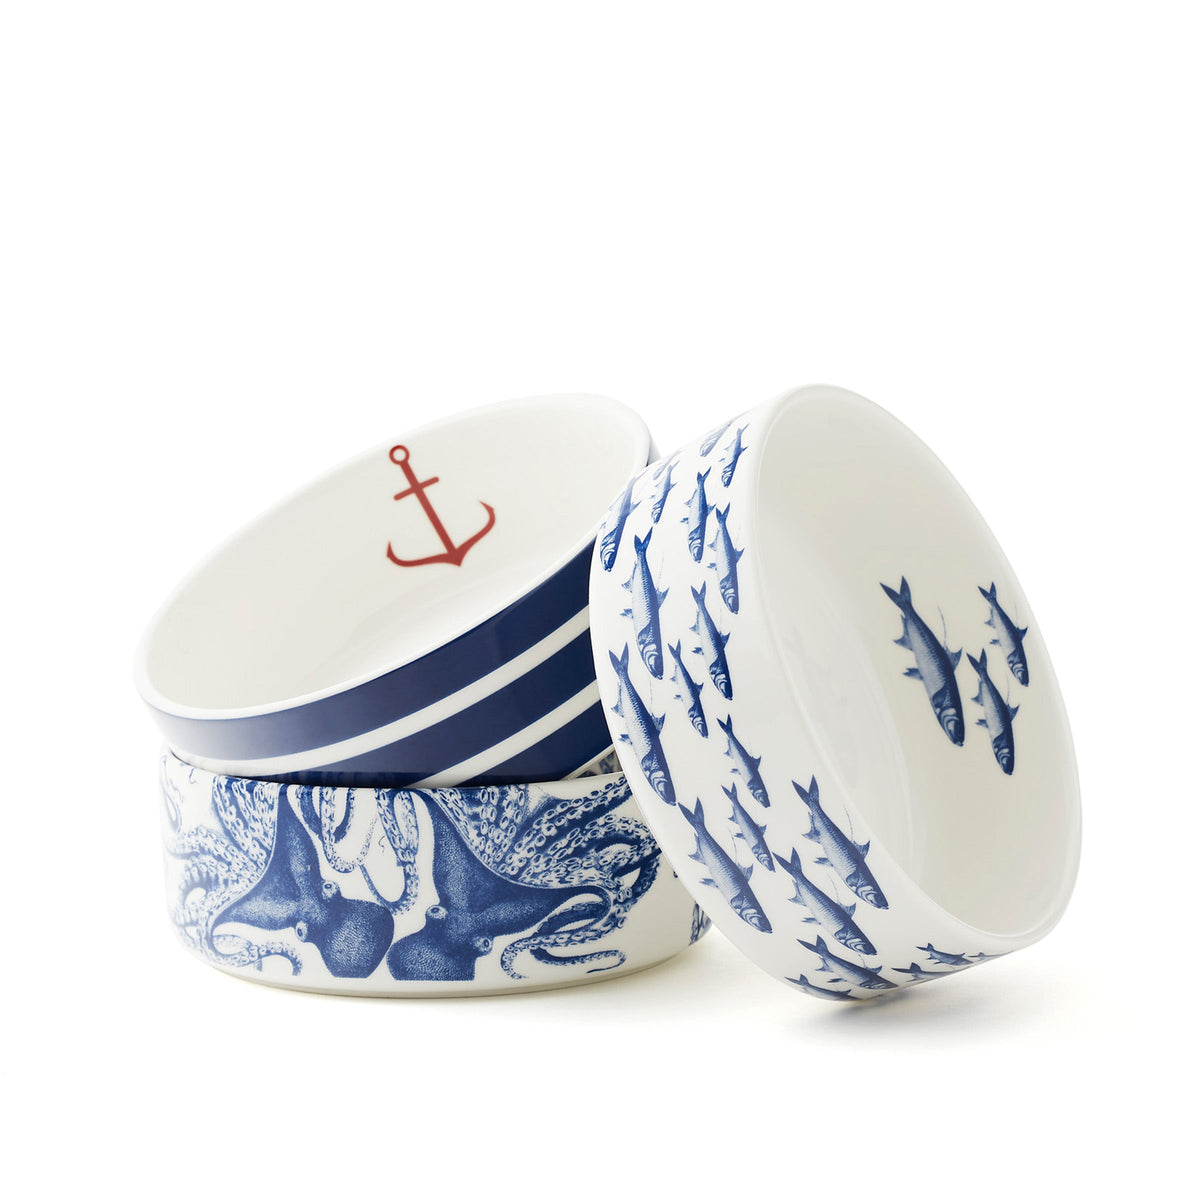 Three Lucy Medium Pet Bowls with anchors on them.